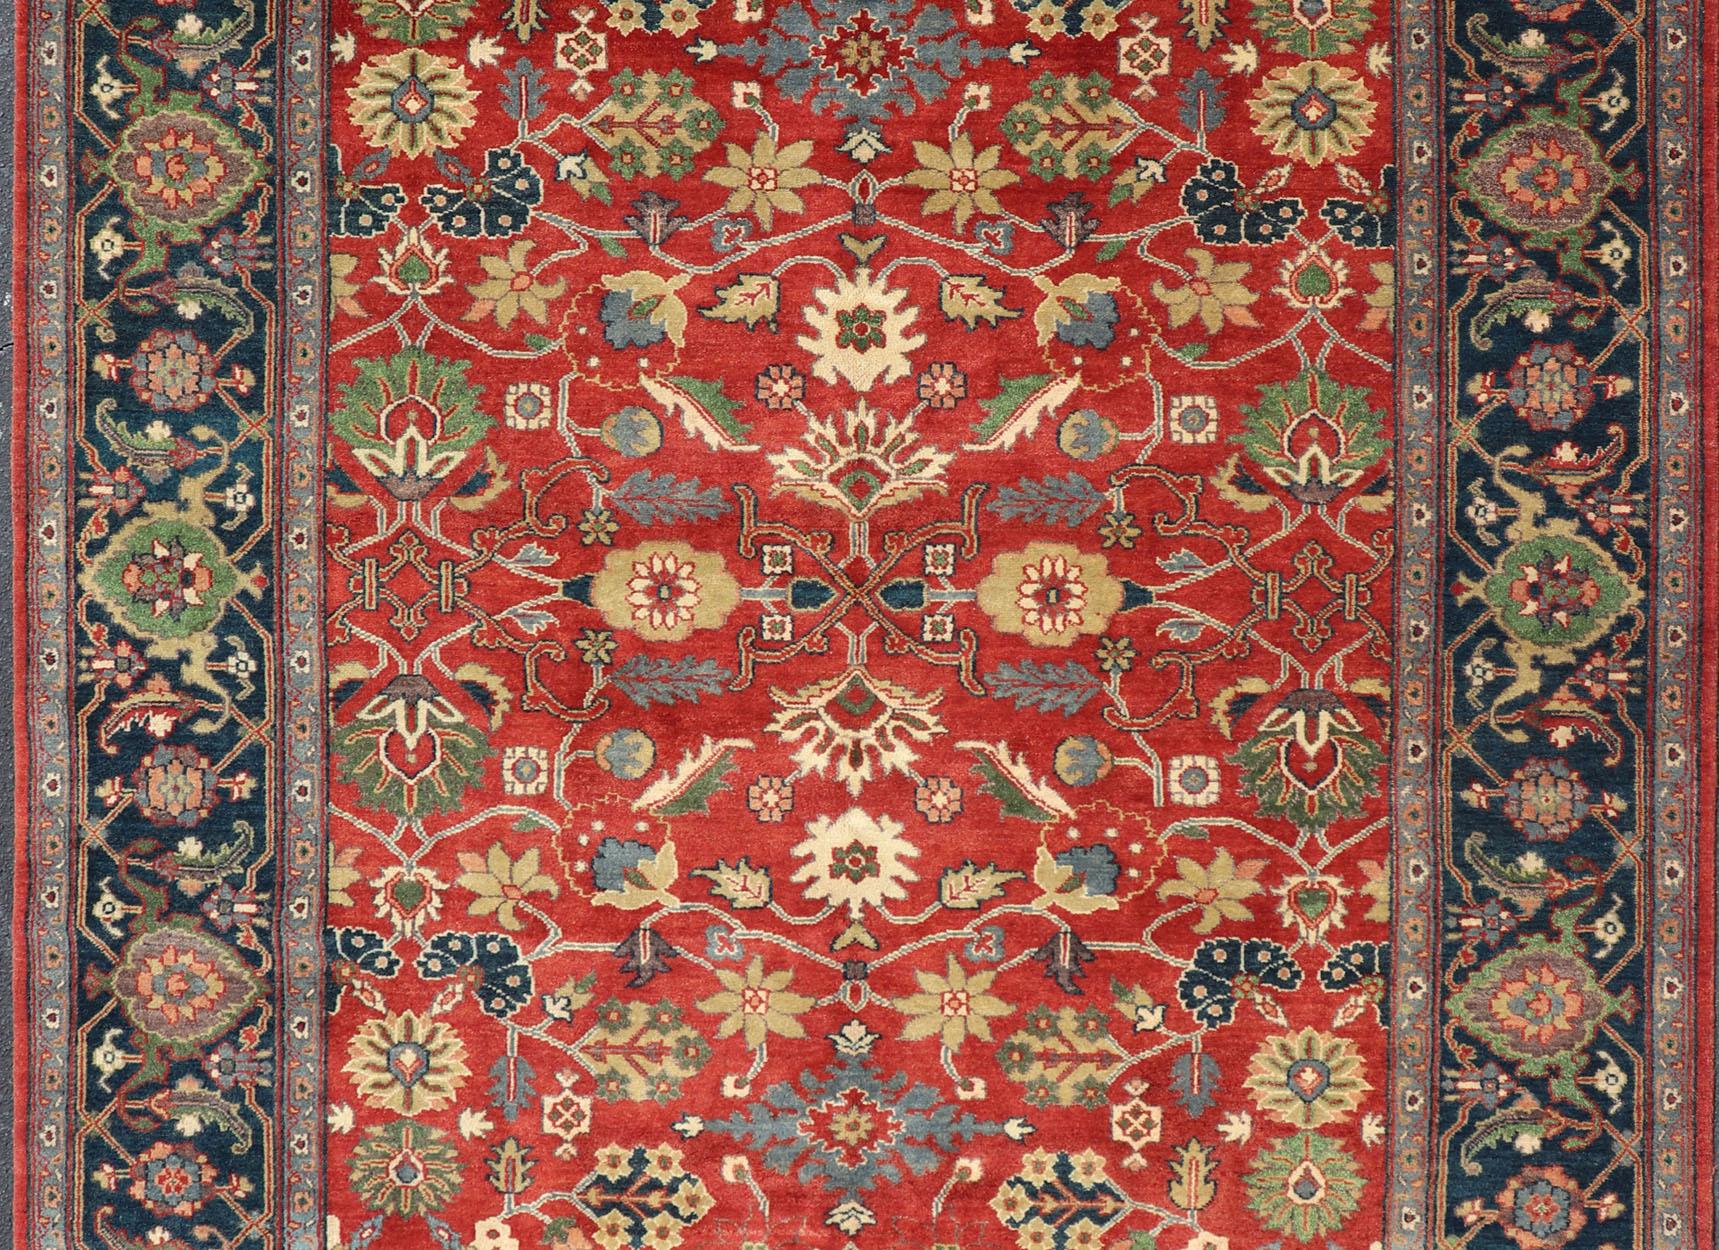 Reproduction Sultanabad-Mahal All-over Floral Hand-Knotted Carpet  8